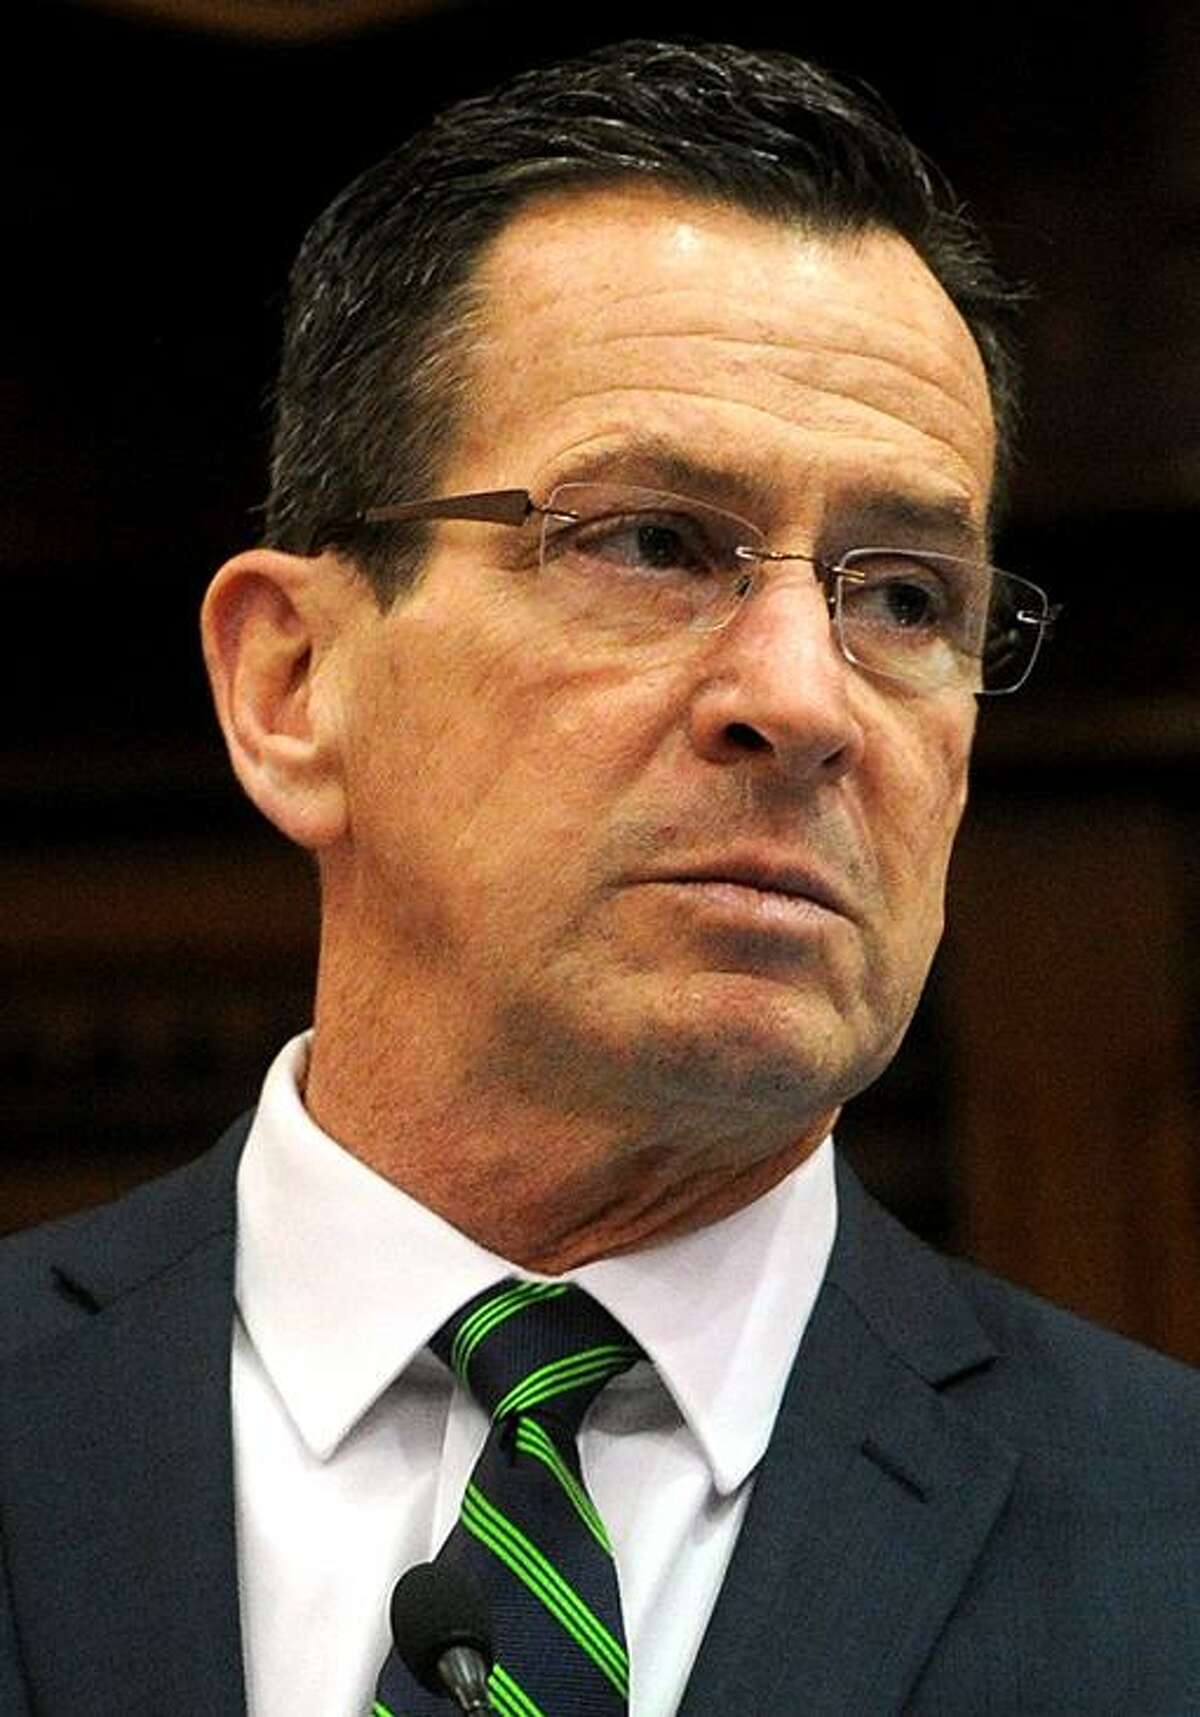 Gov. Dannel P. Malloy’s deal with state employee unions was approved unanimously by all bargaining units, with an 83-17 percent margin of victory in the popular vote.